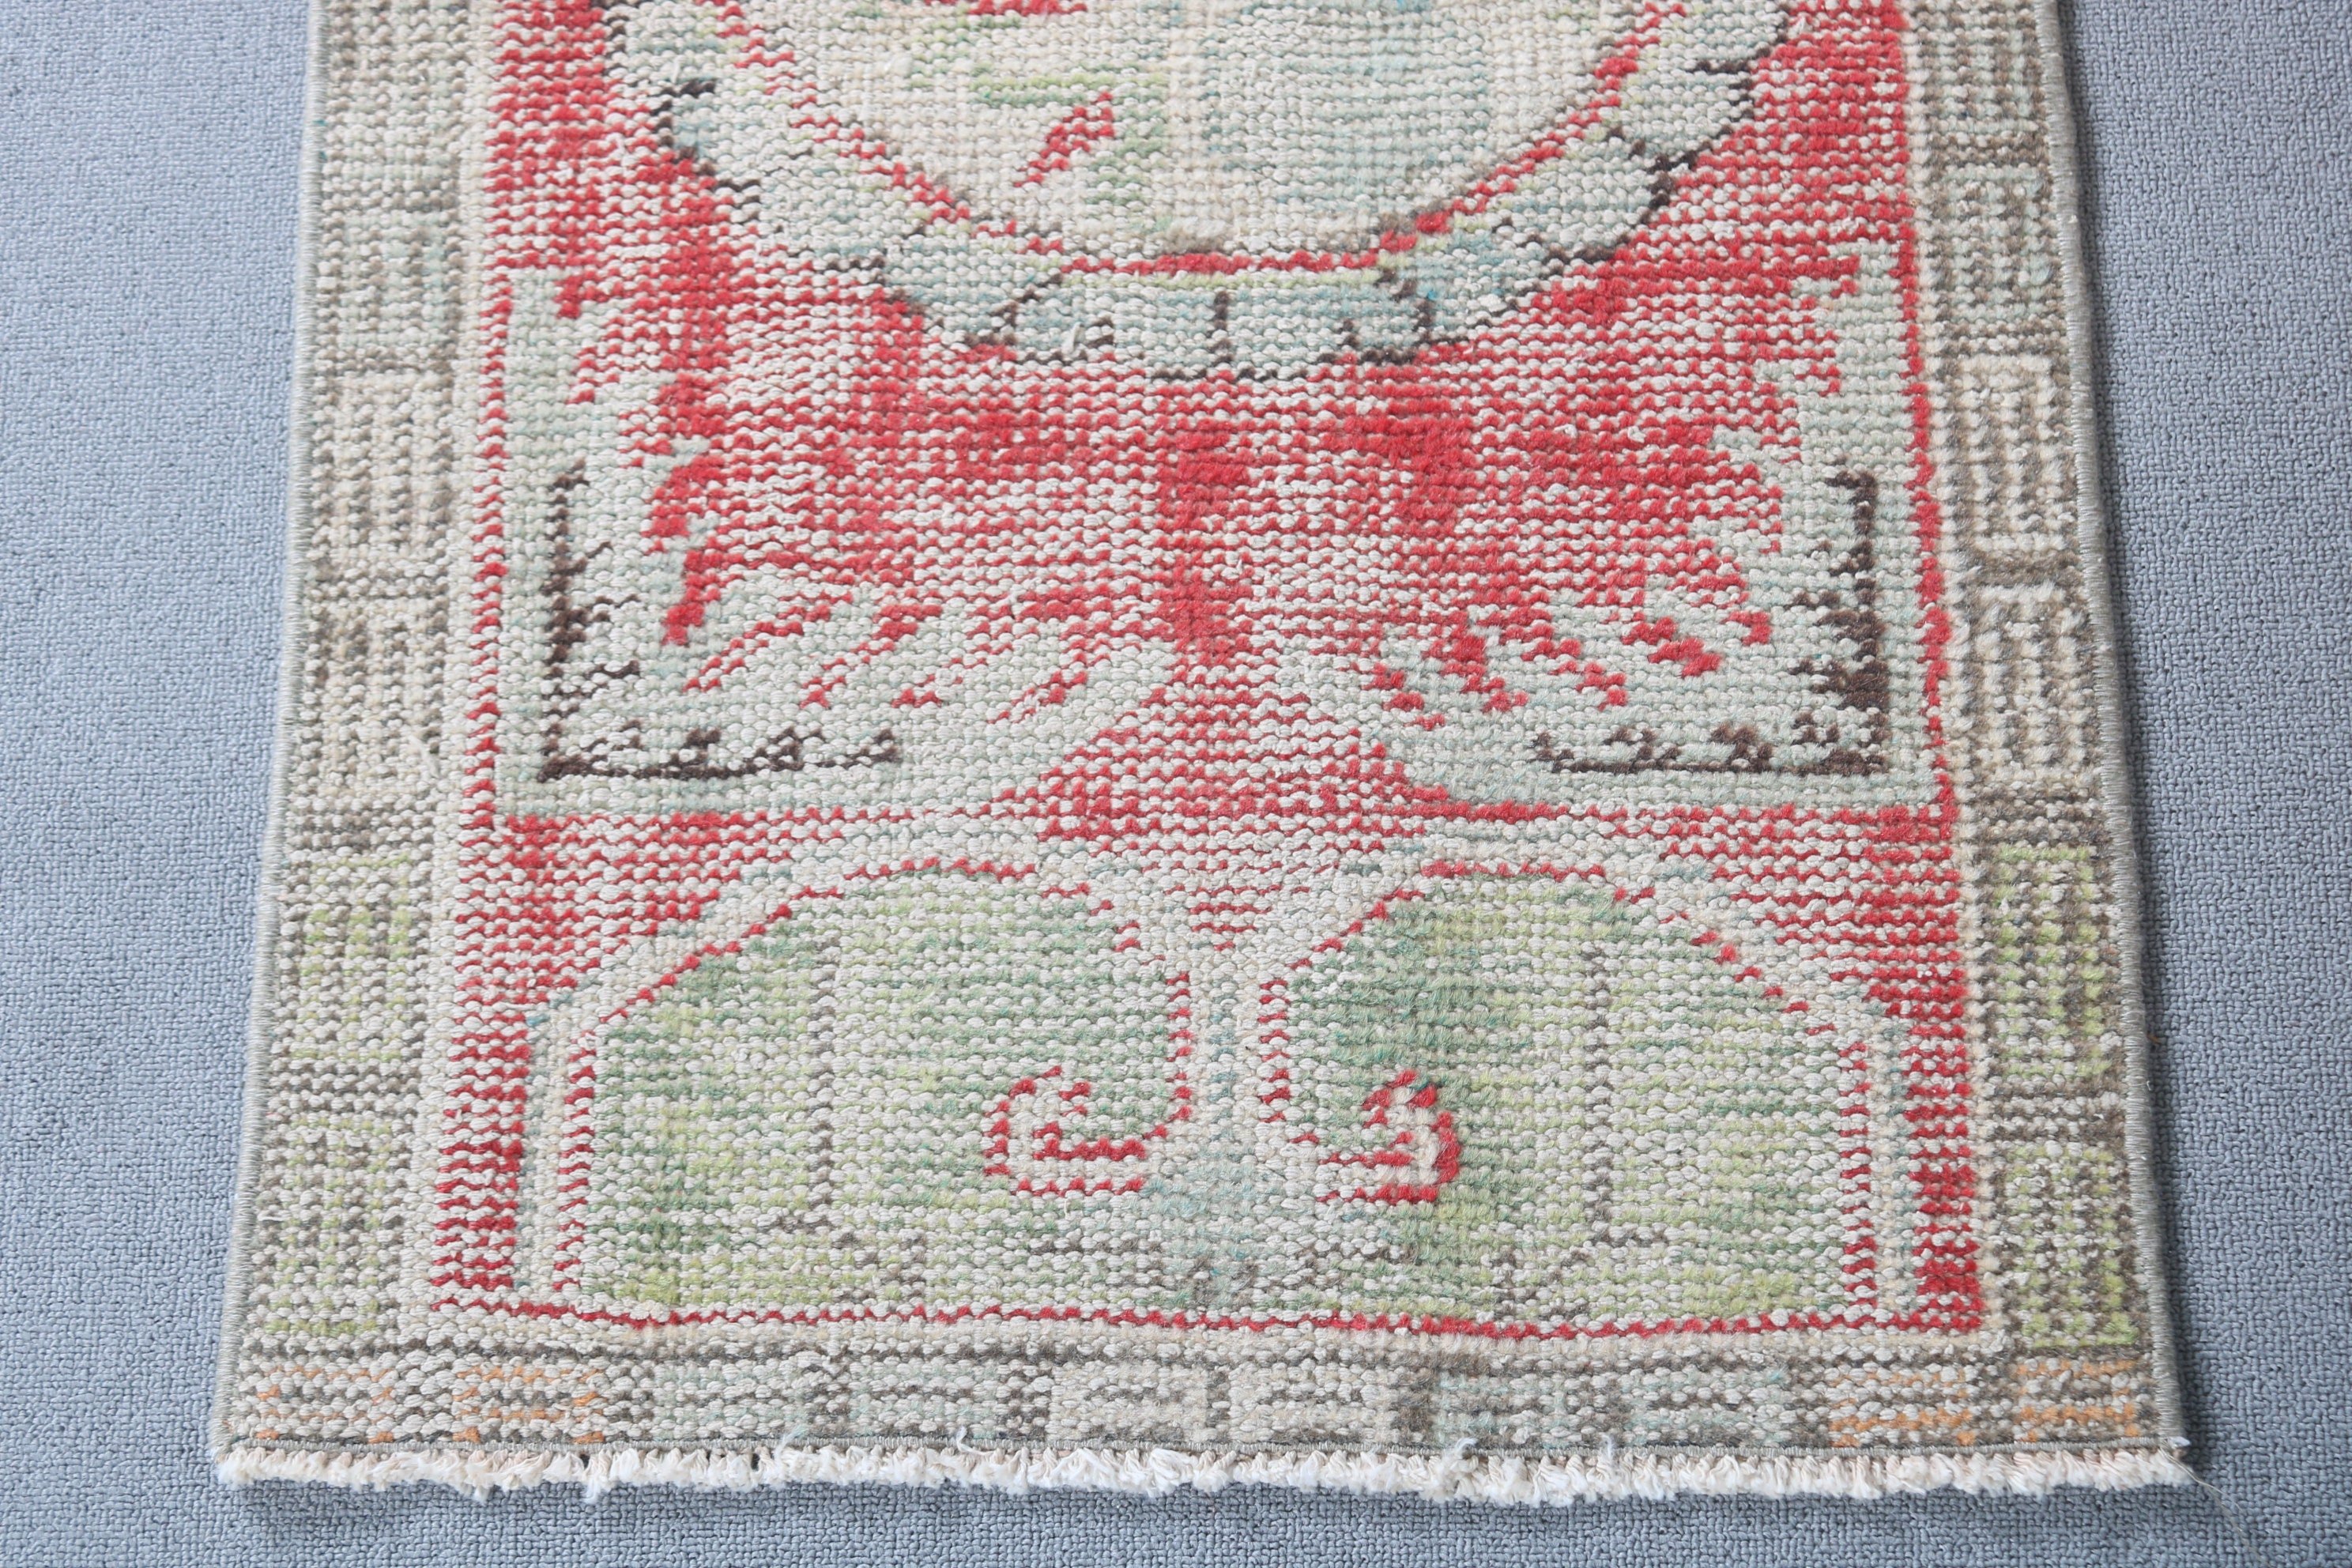 Entry Rugs, Wall Hanging Rug, Kitchen Rugs, 2.1x3.2 ft Small Rug, Green Kitchen Rugs, Vintage Rugs, Turkish Rugs, Floor Rugs, Organic Rug